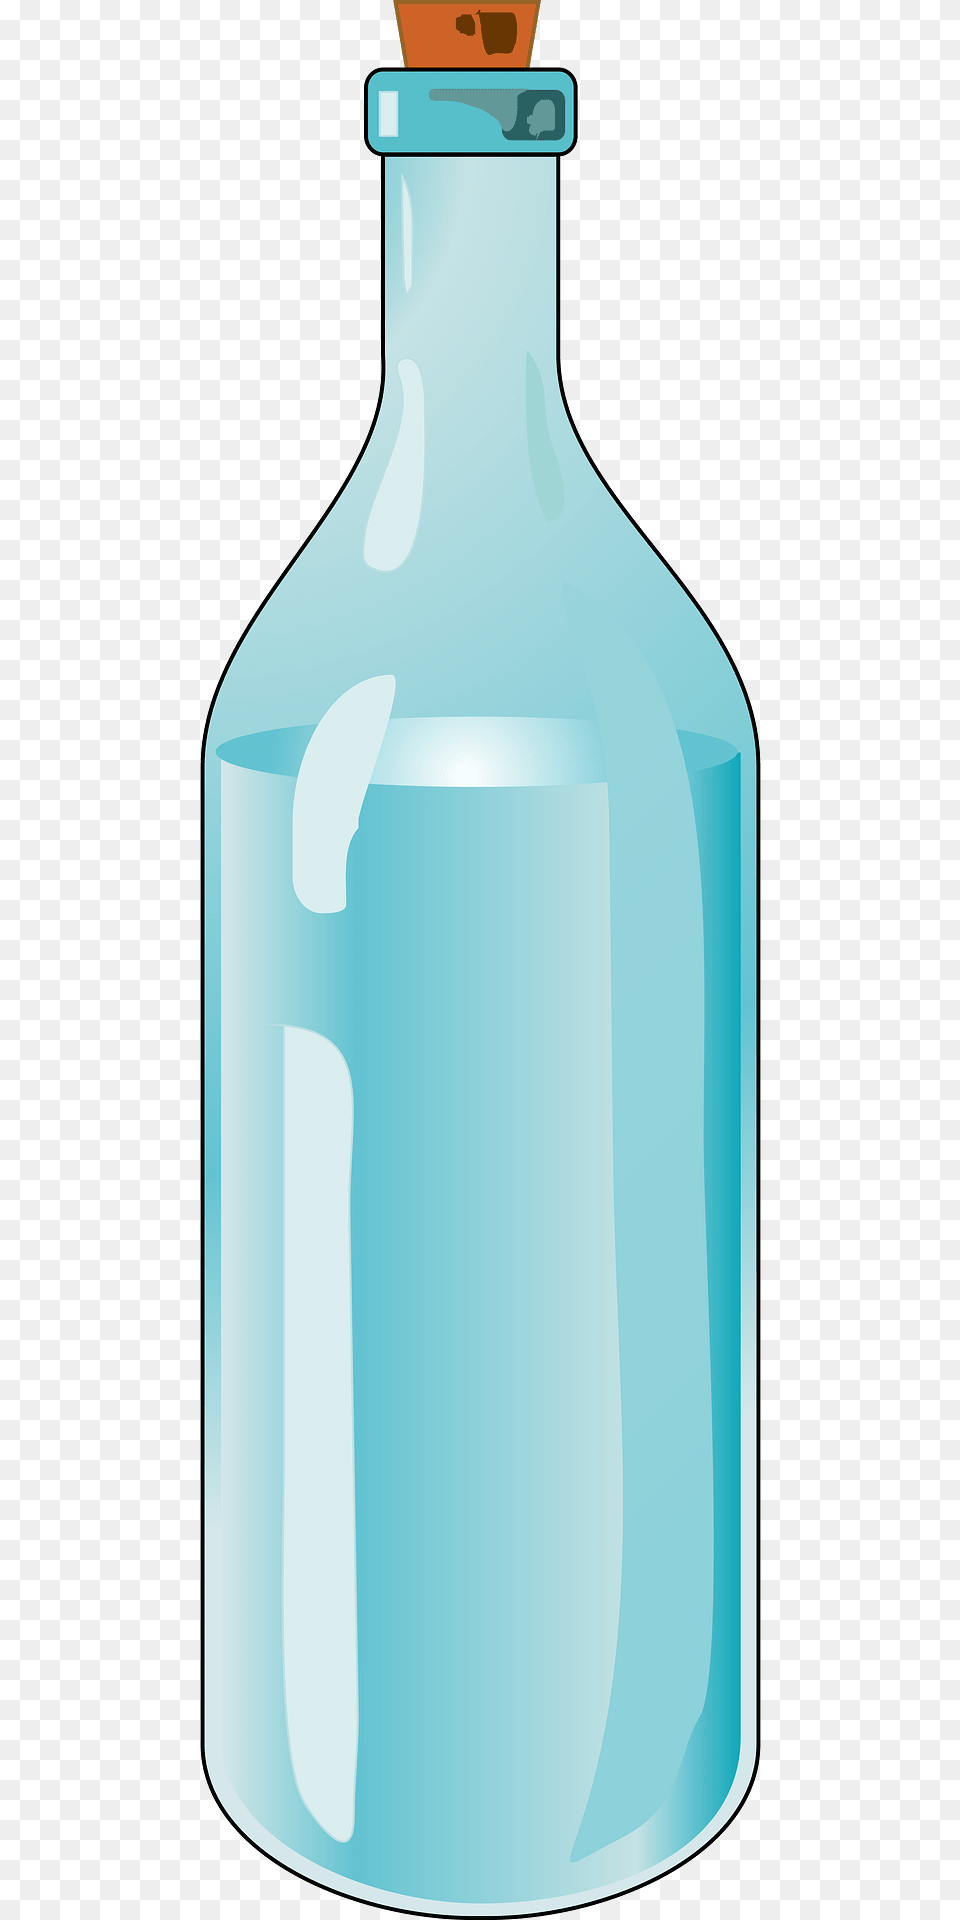 Bottle With Cork Clipart, Jar, Shaker, Glass Png Image